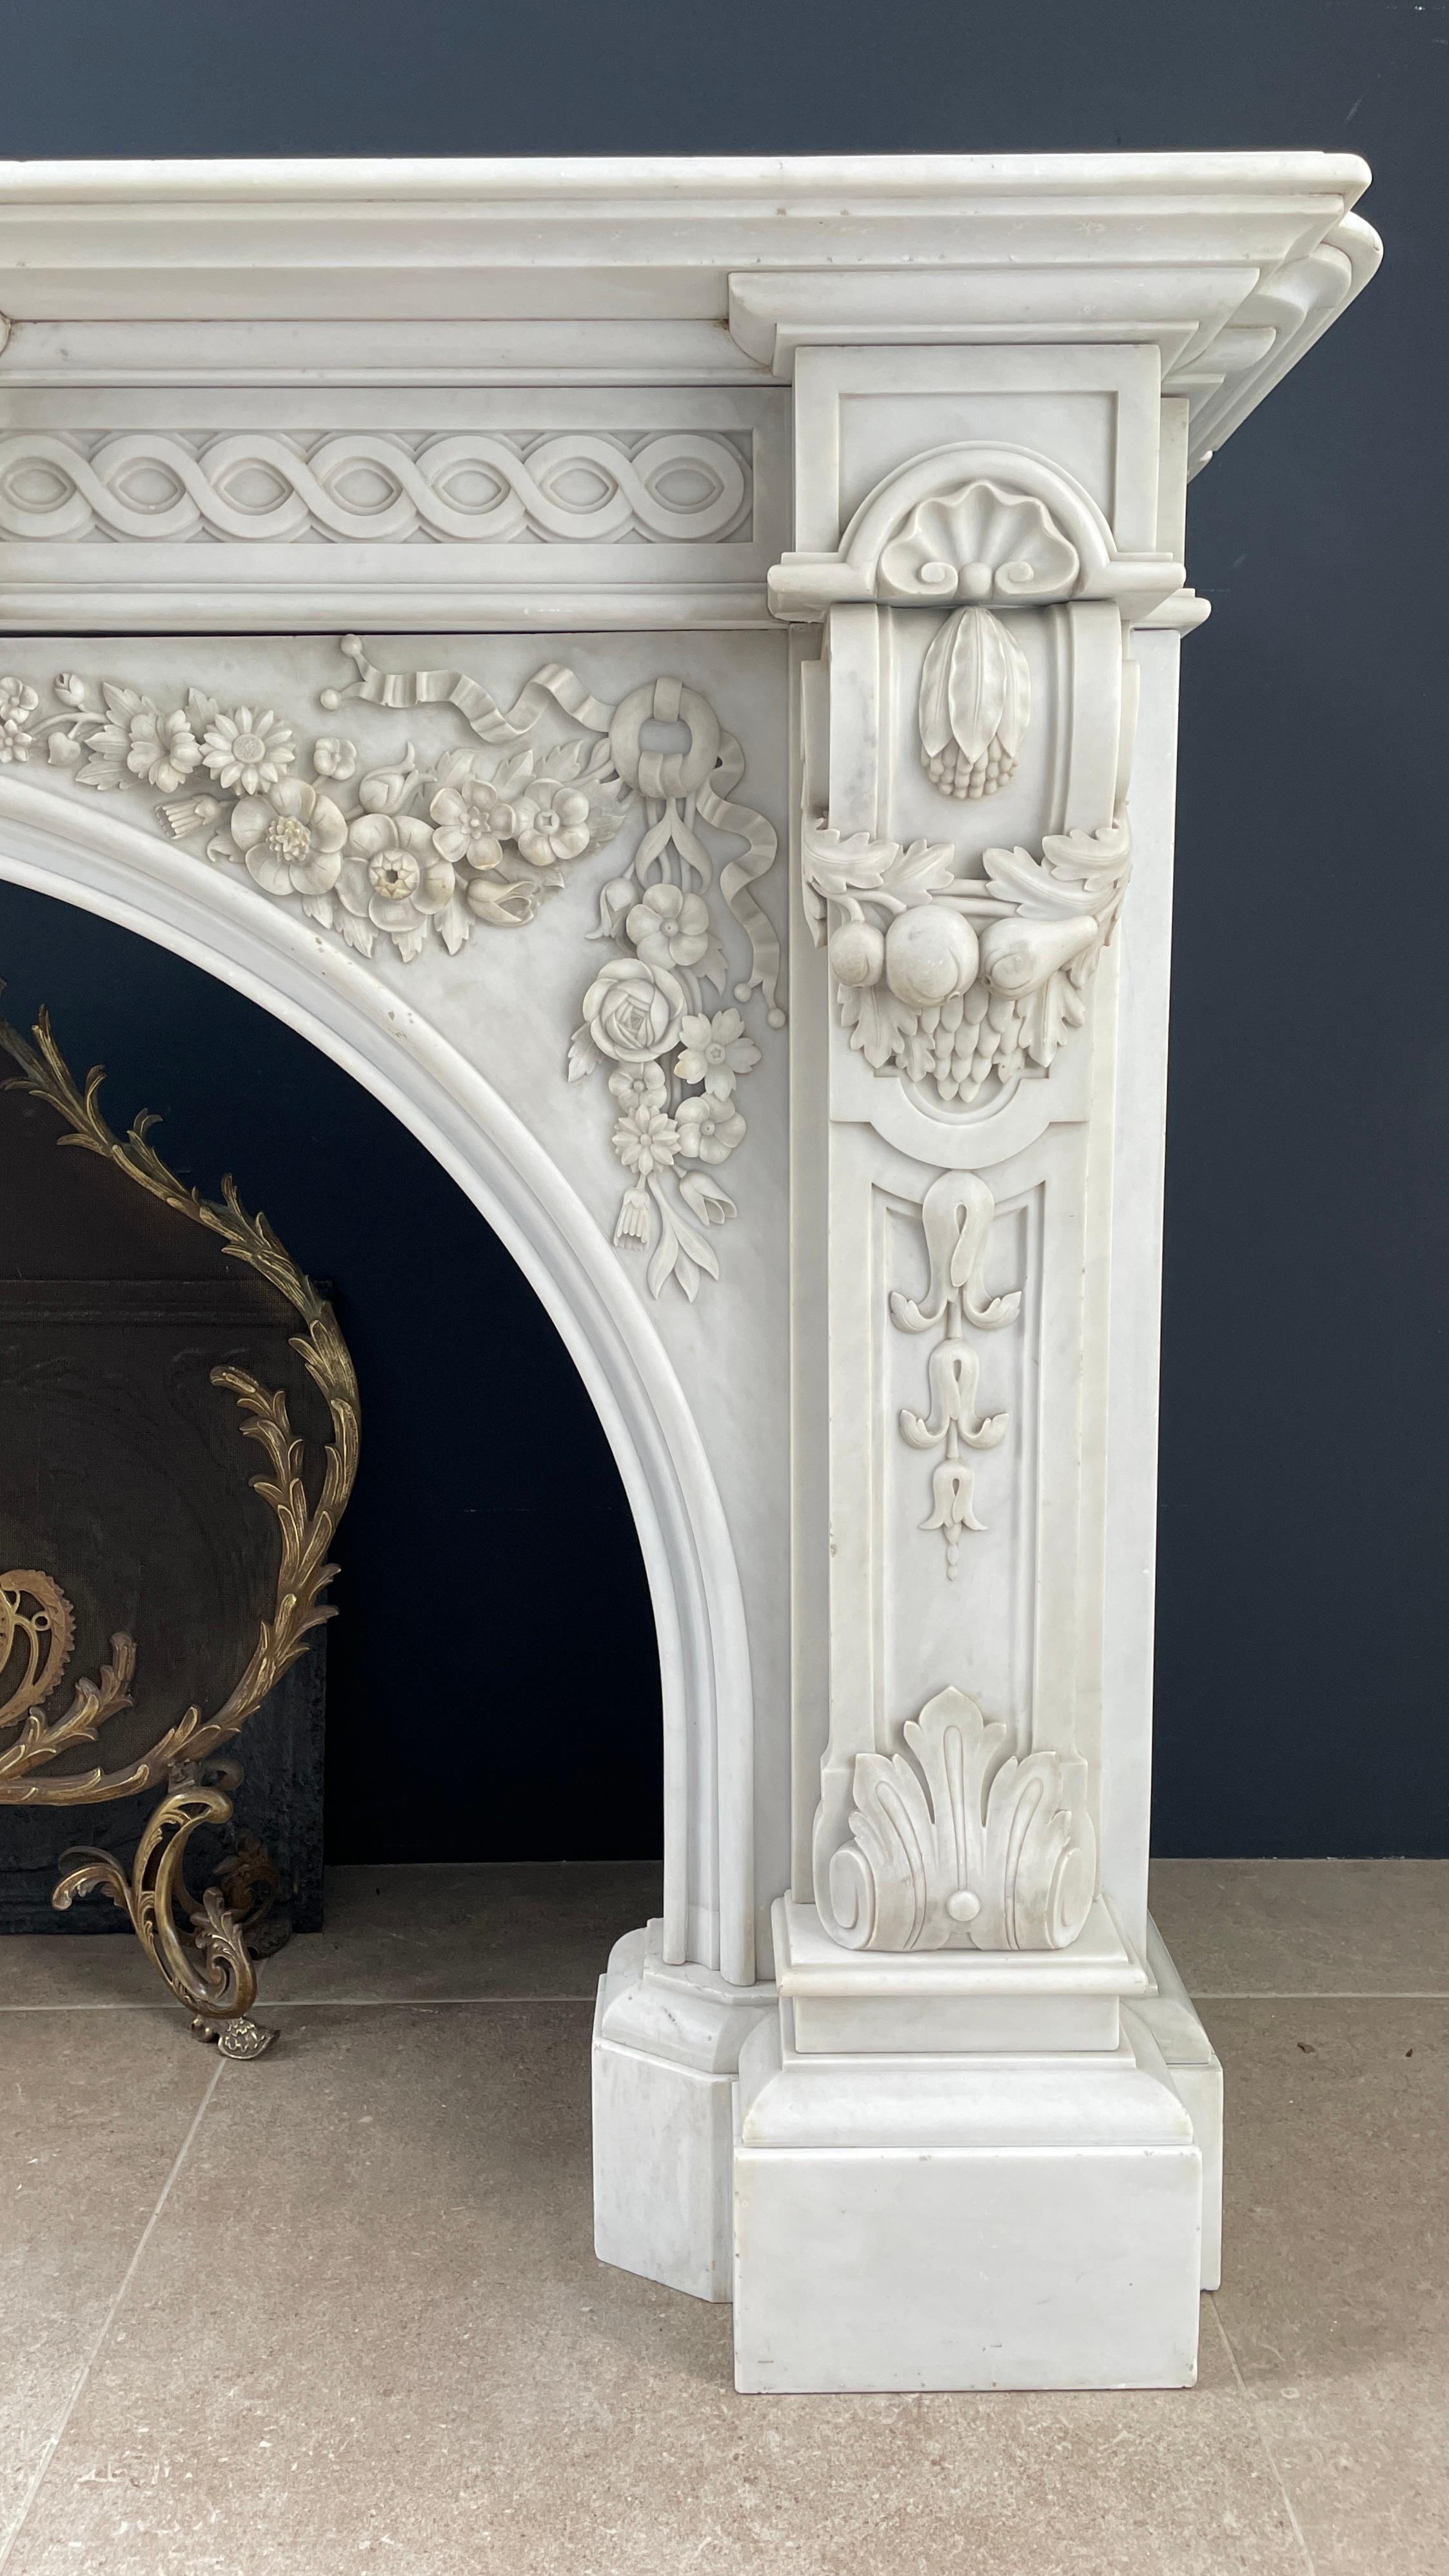 Louis XV Special Luxury French Antique Circulation Fireplace Carrara Marble